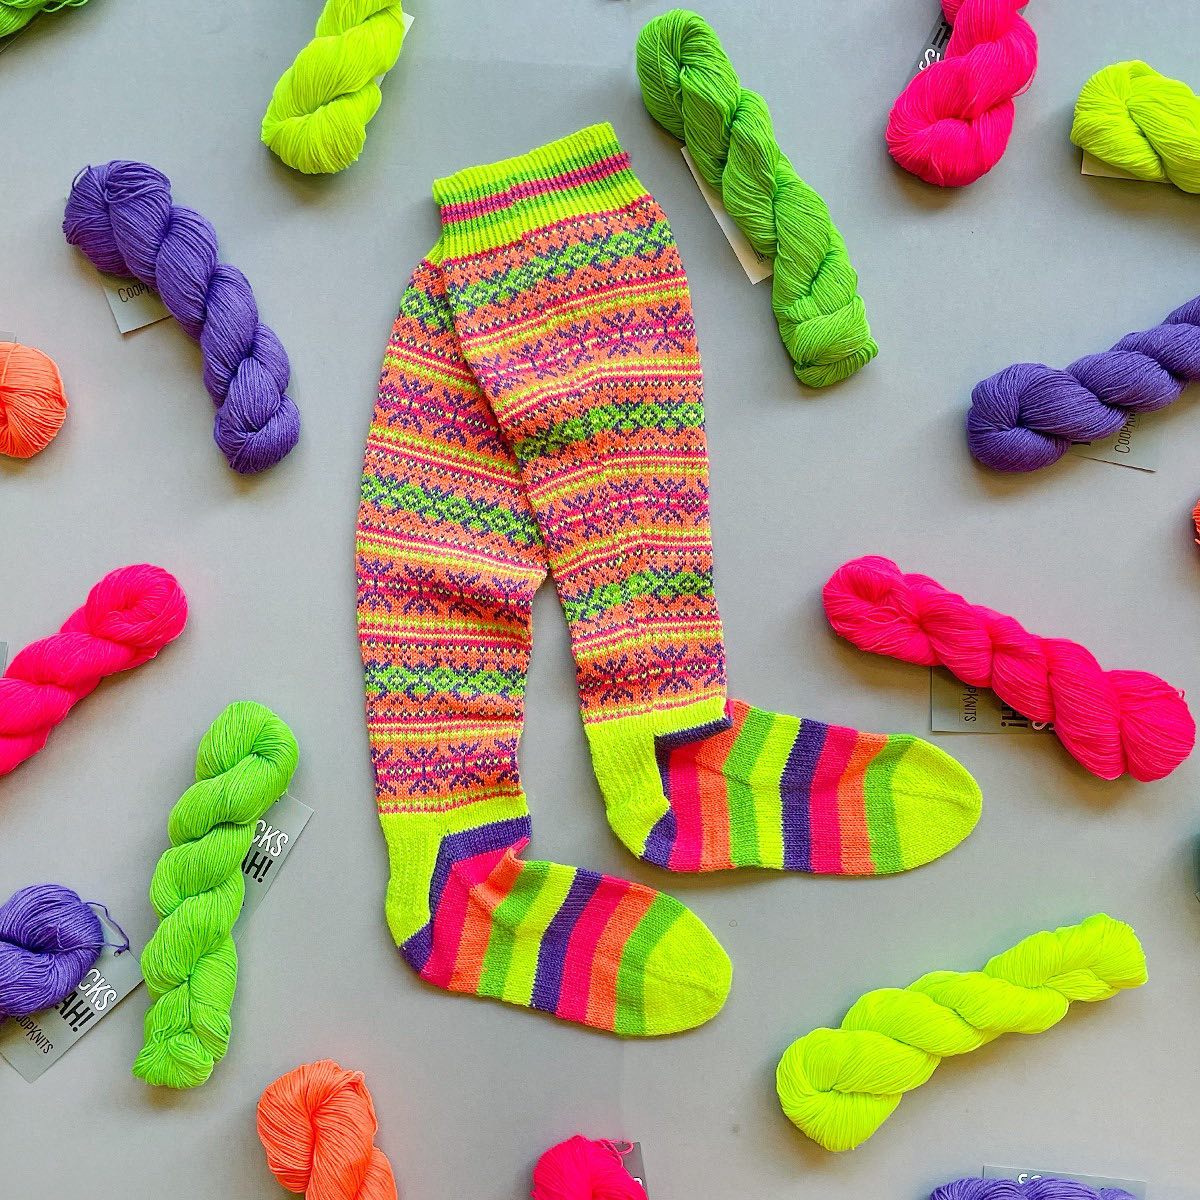 Our most favourite pair of socks ever - the Sockitude - especially designed for us by @julieknitsinparis

They literarily scream of fun, festivities and parties!!!

What better occasion to show them off than with the newly arrival of our favourite sock yarn - Socks Yeah! 
In all the NEONS!

The Sockitude kit and the newly delivered Socks Yeah! are up online now.

#sockknitting #sockyarn #sockitudesocks #julieknitsinparis #christmasstockings #knitwithattitude #londonyarnshop #fortheloveofknitting #makersgonnamake